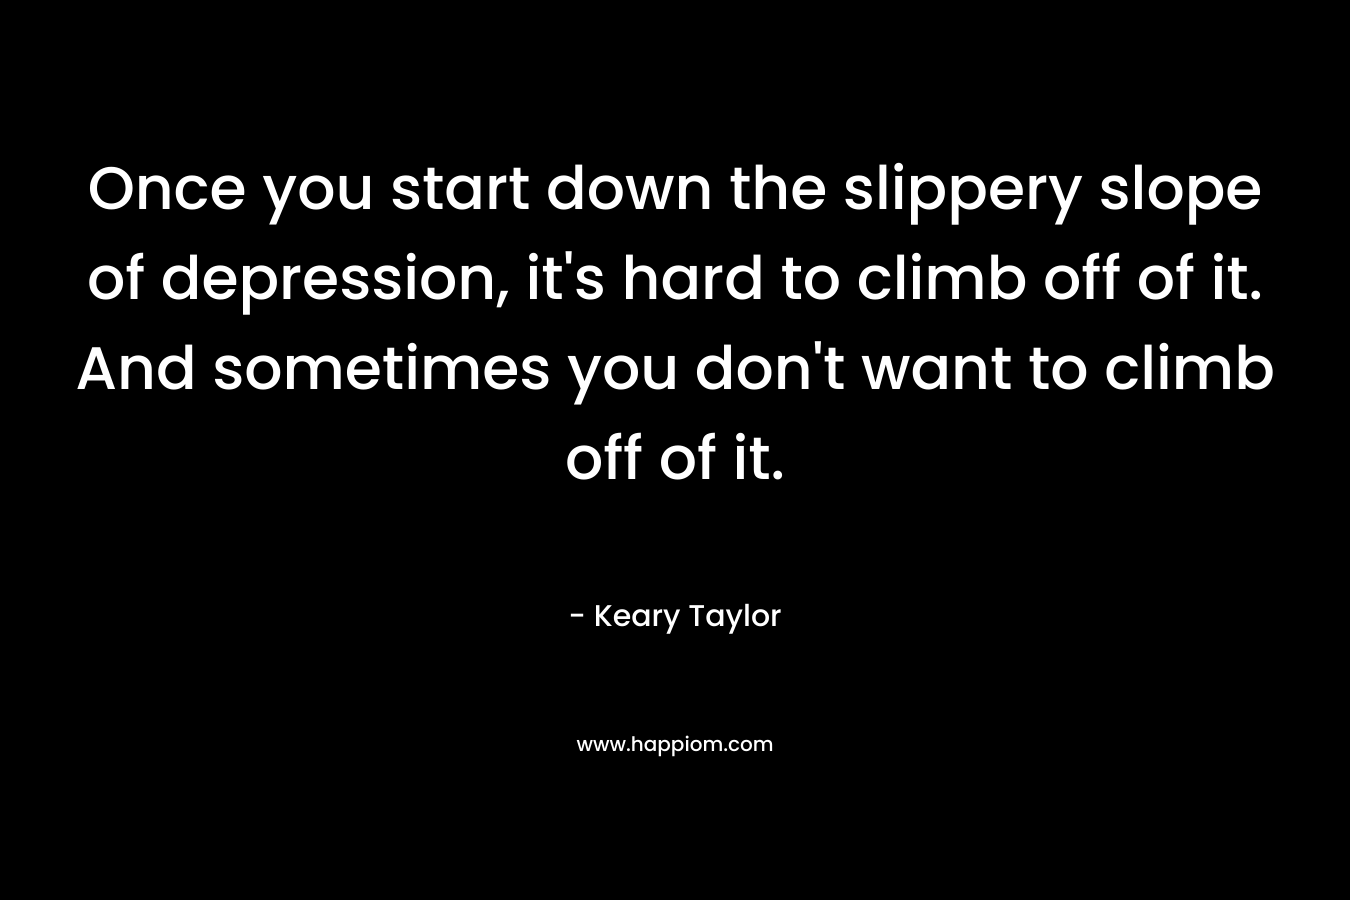 Once you start down the slippery slope of depression, it's hard to climb off of it. And sometimes you don't want to climb off of it.